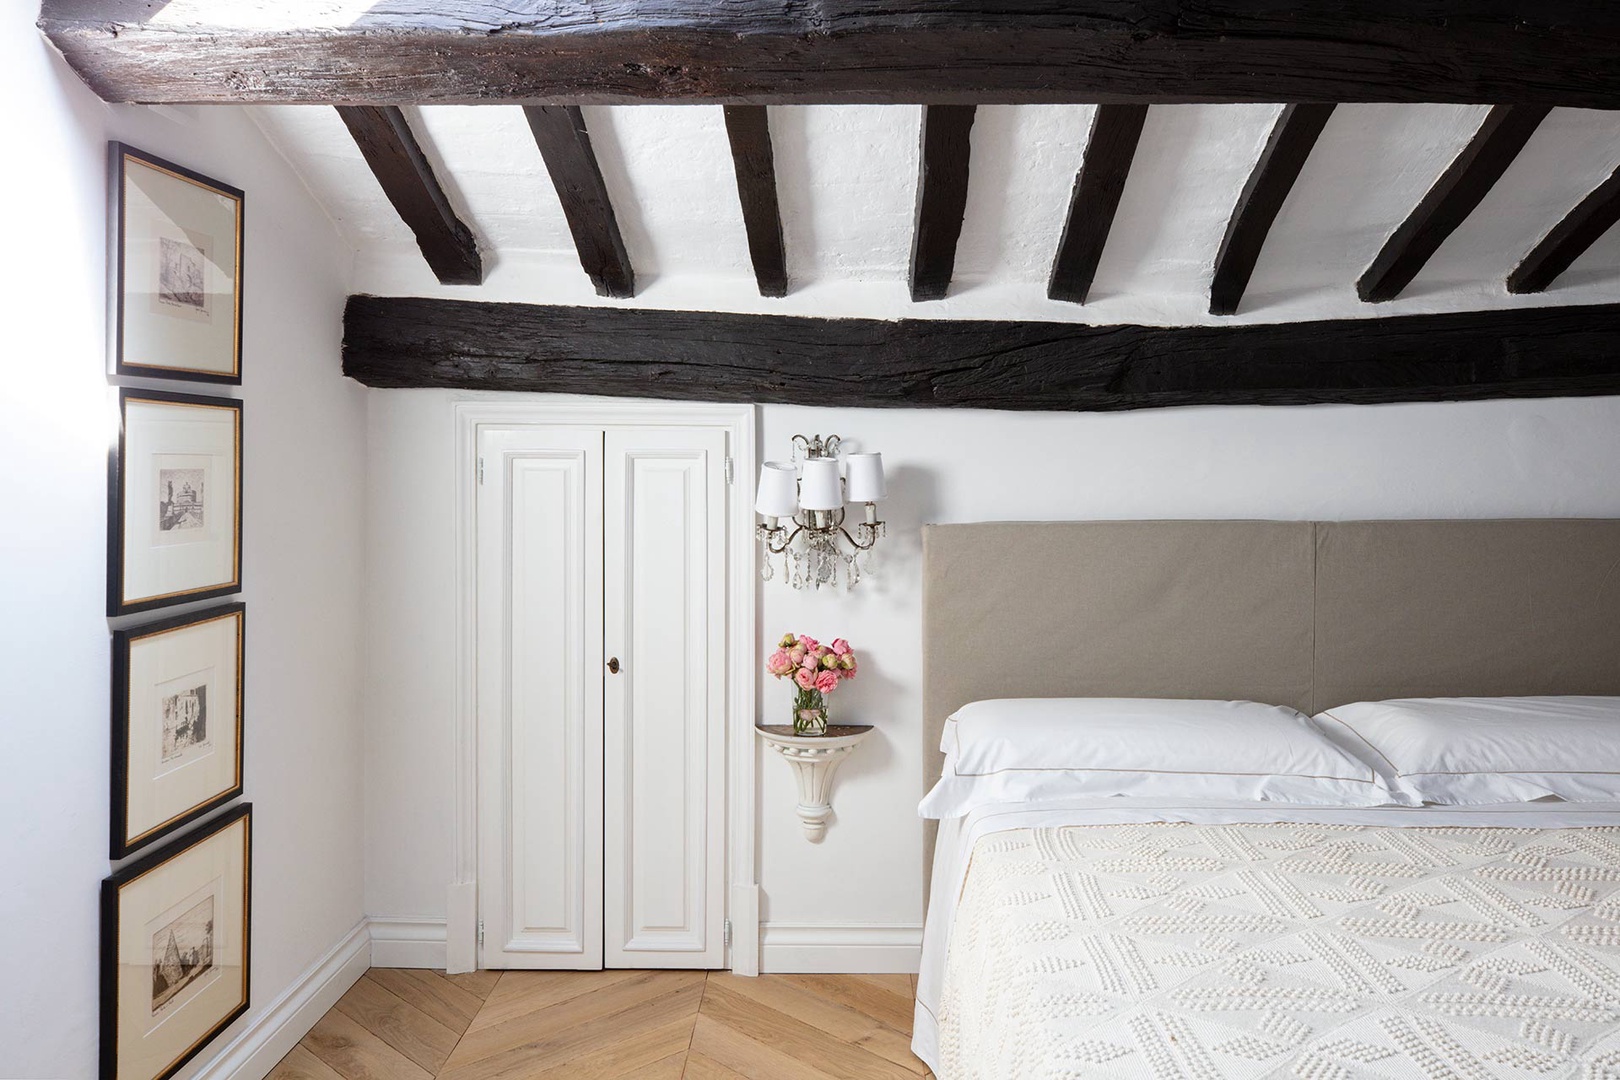 The rafters over the bed create an intimate and cozy atmosphere.